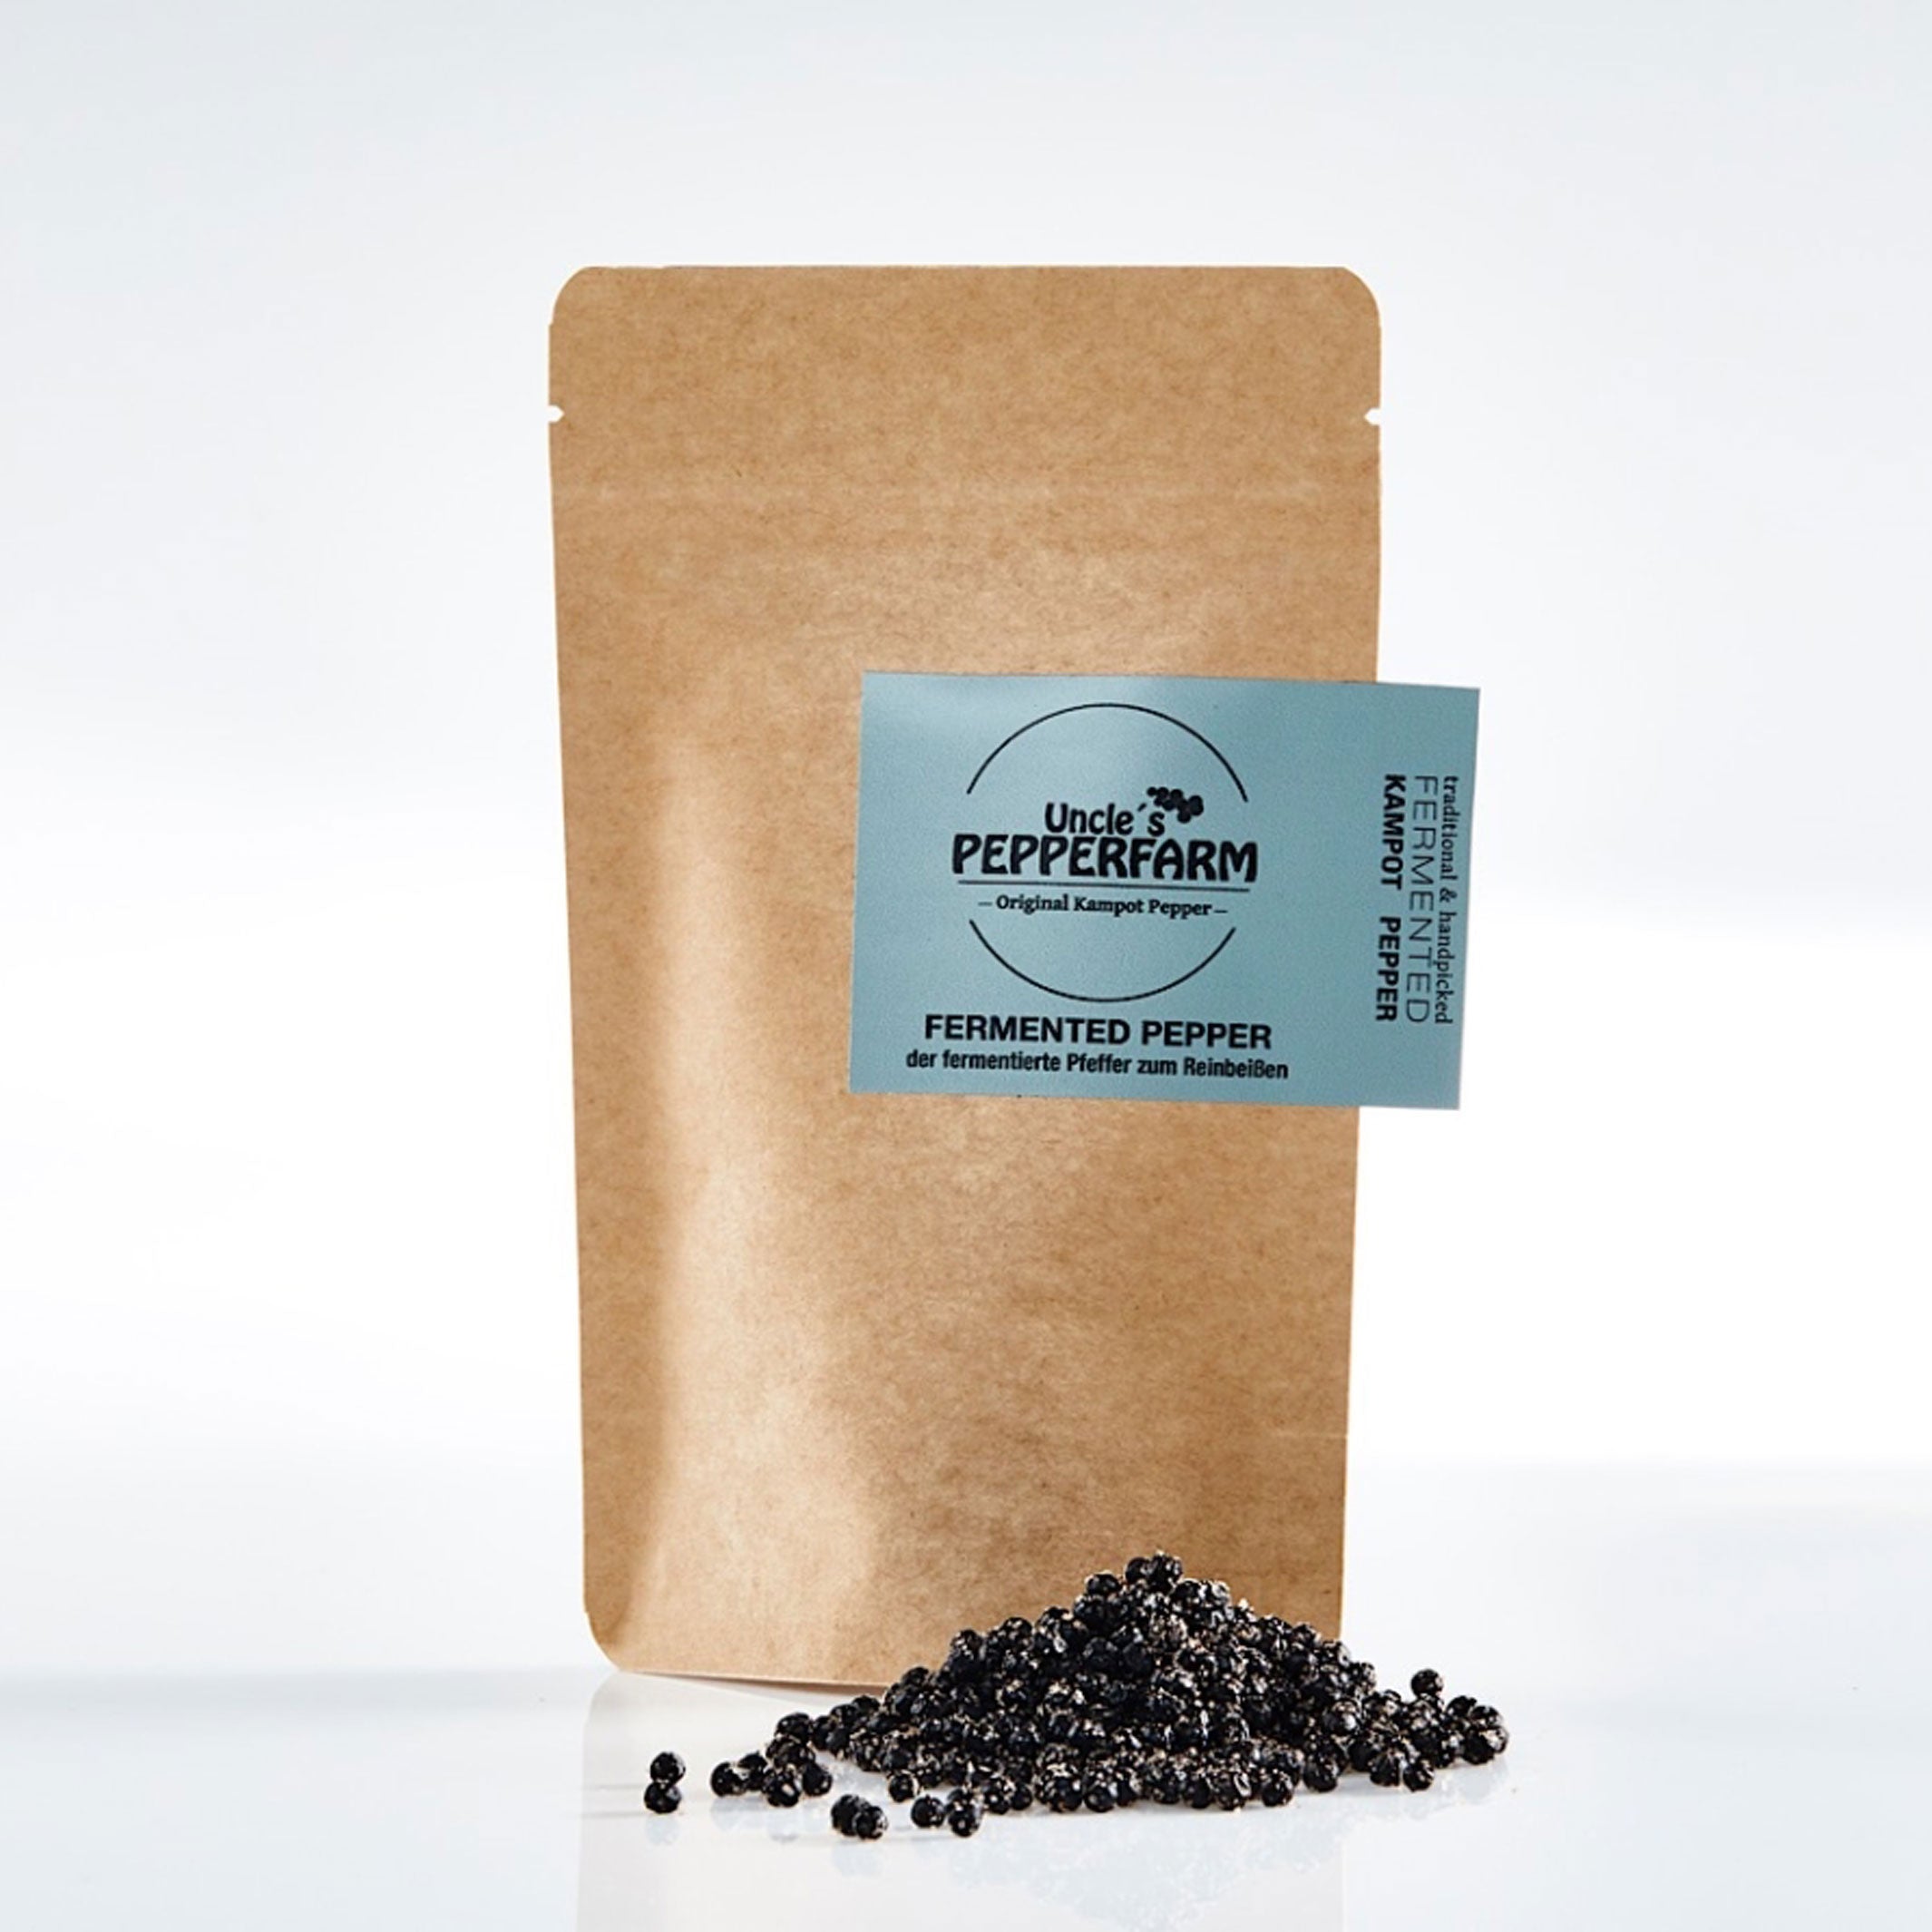 Fermented KAMPOT PEPPER | PEPPERCORNS - pickled in sea salt | 150g in aroma protection bag | Uncle's Pepperfarm